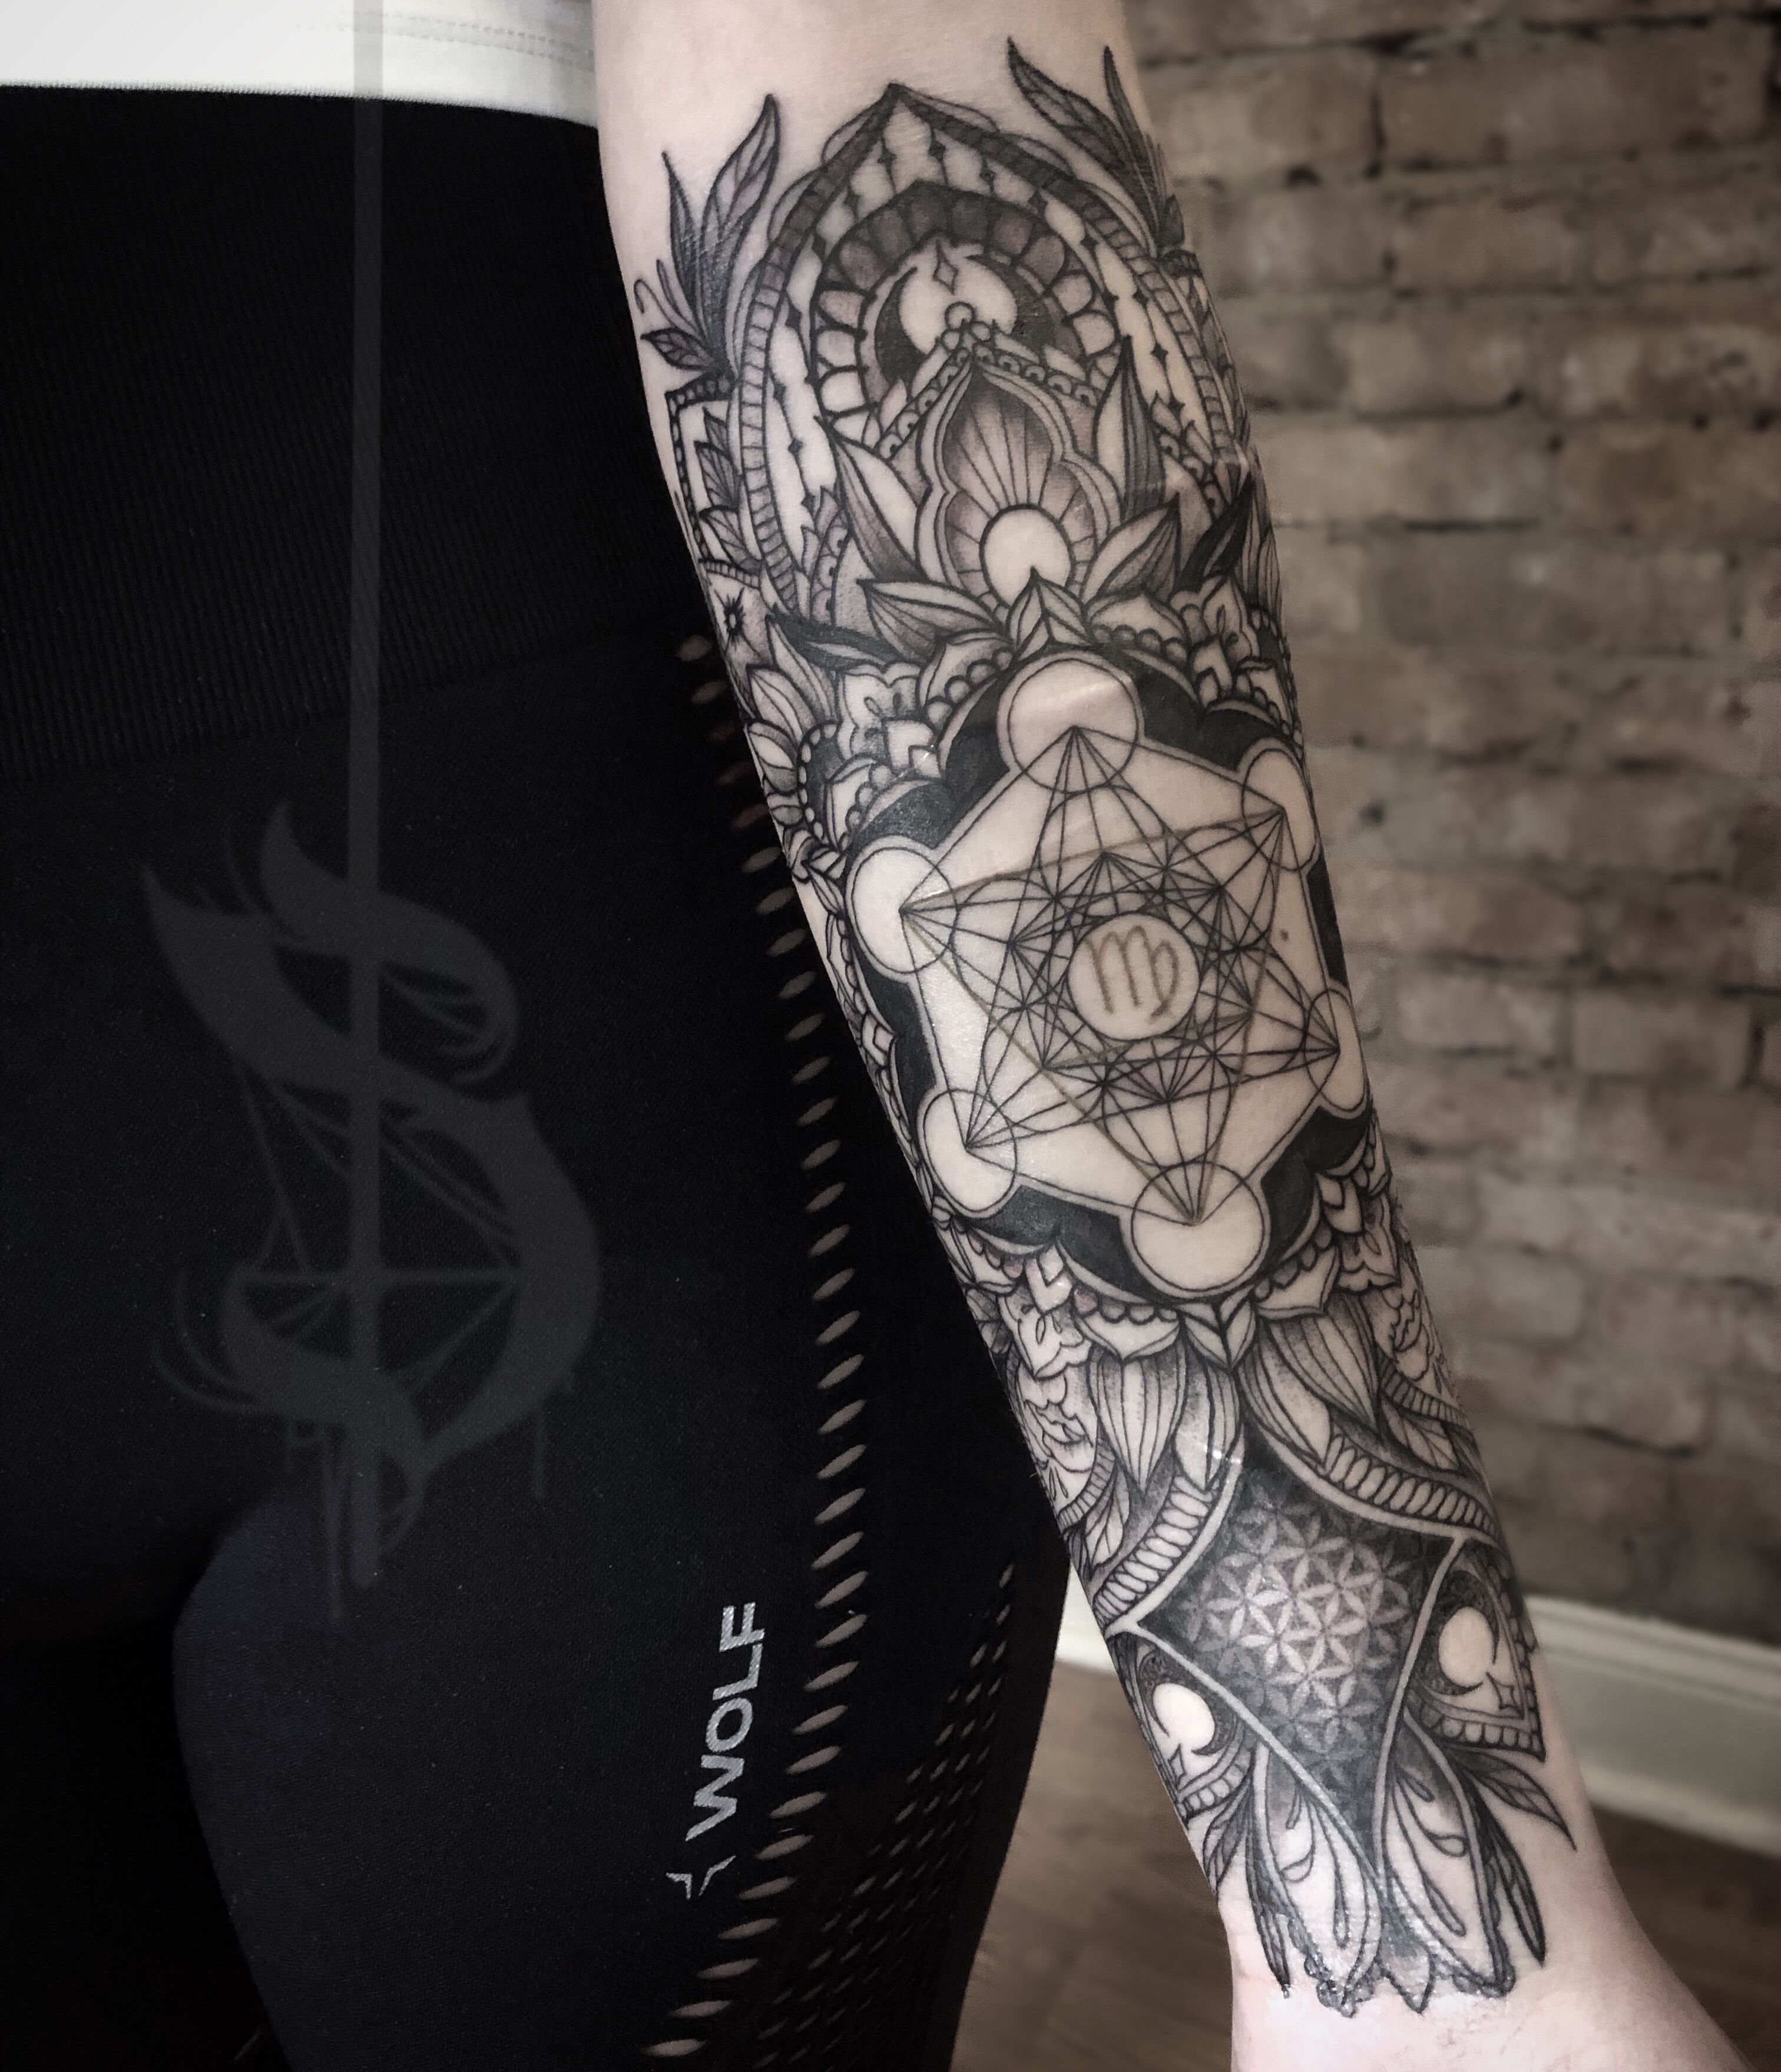 Explore Amazing Designs  Find Expert Artists for Geometric Tattoos   Certified Tattoo Studios